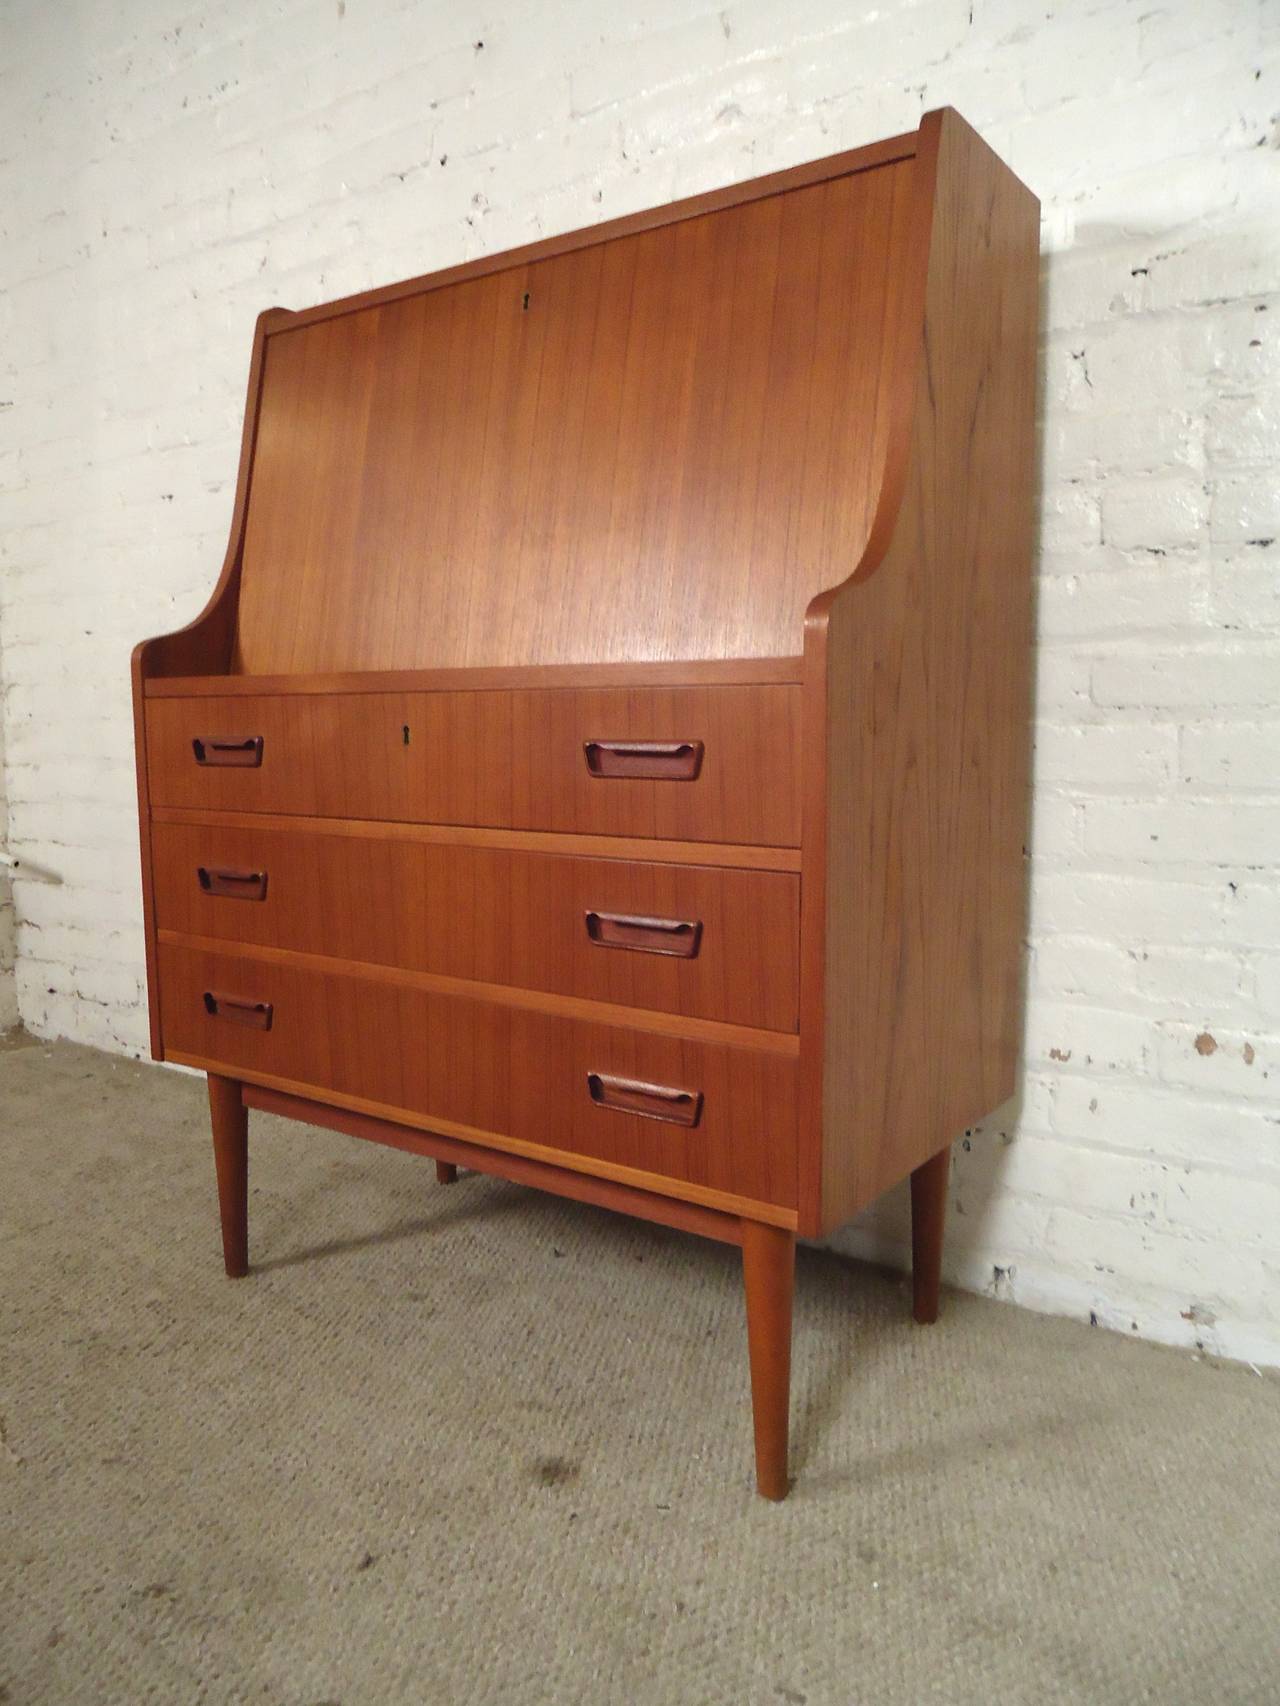 Mid-century modern drop front secretary desk with drawers. Beautiful teak grain throughout, nicely sculpted handles and tapered legs. The top comes down for a surface area of 32